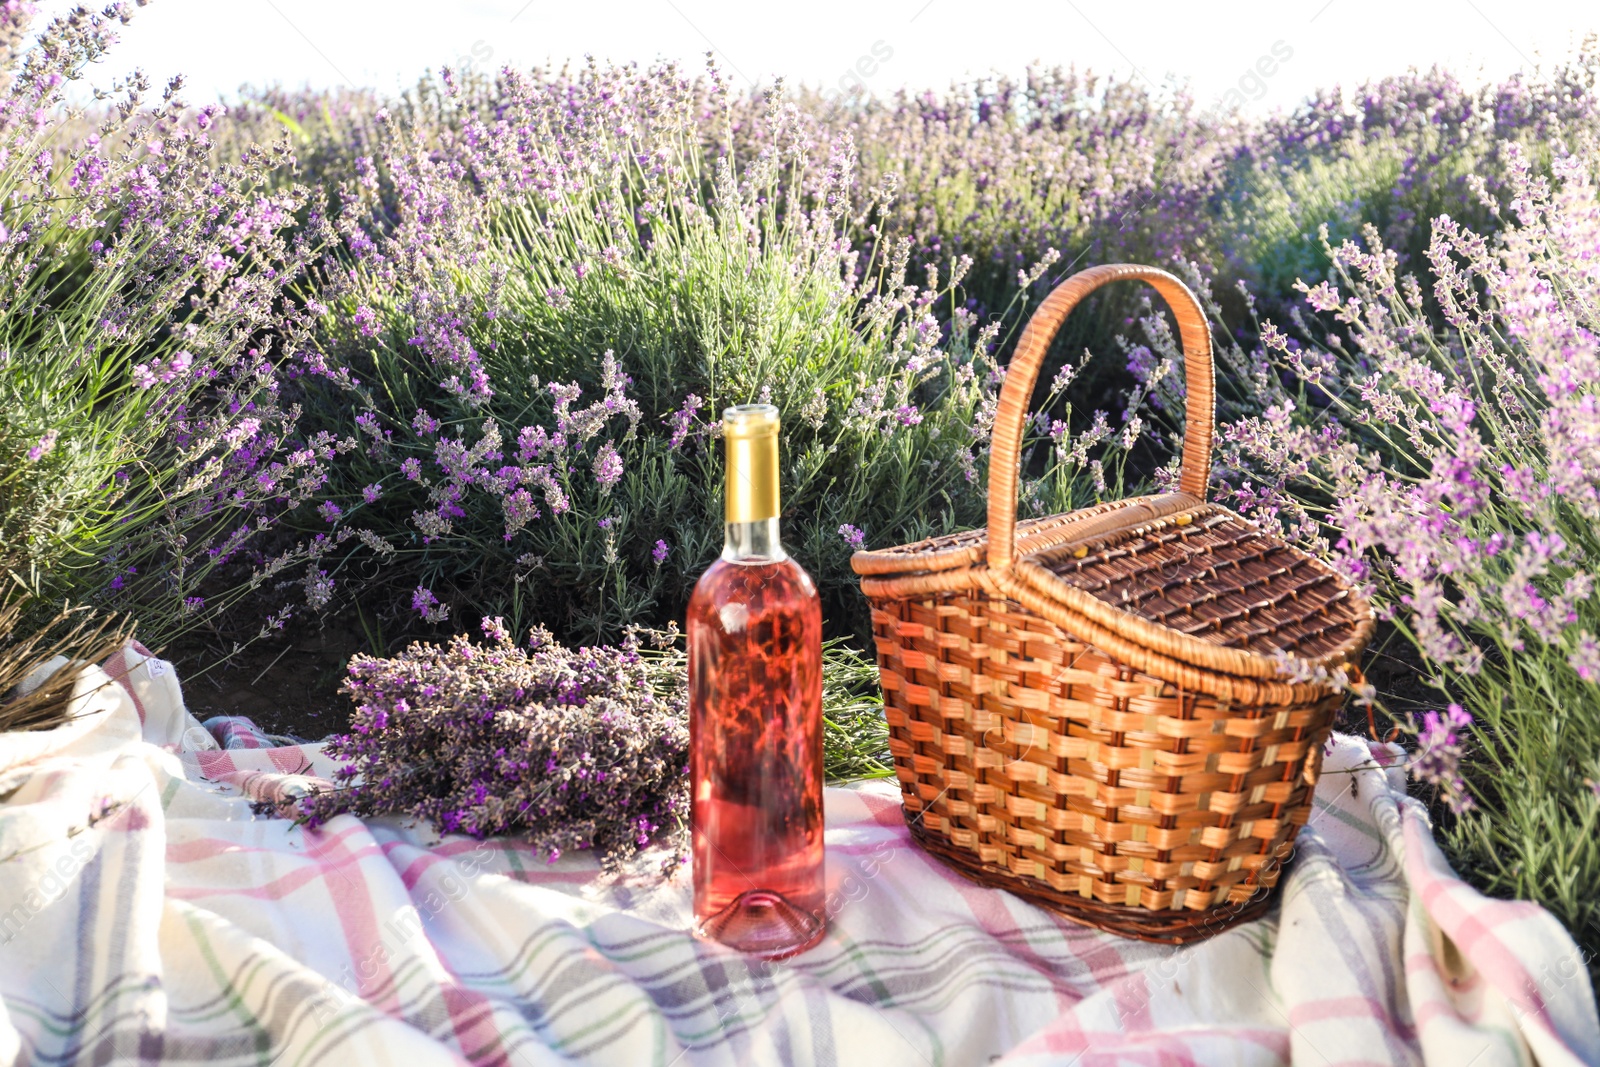 Photo of Bottle of wine and basket on blanket in lavender field